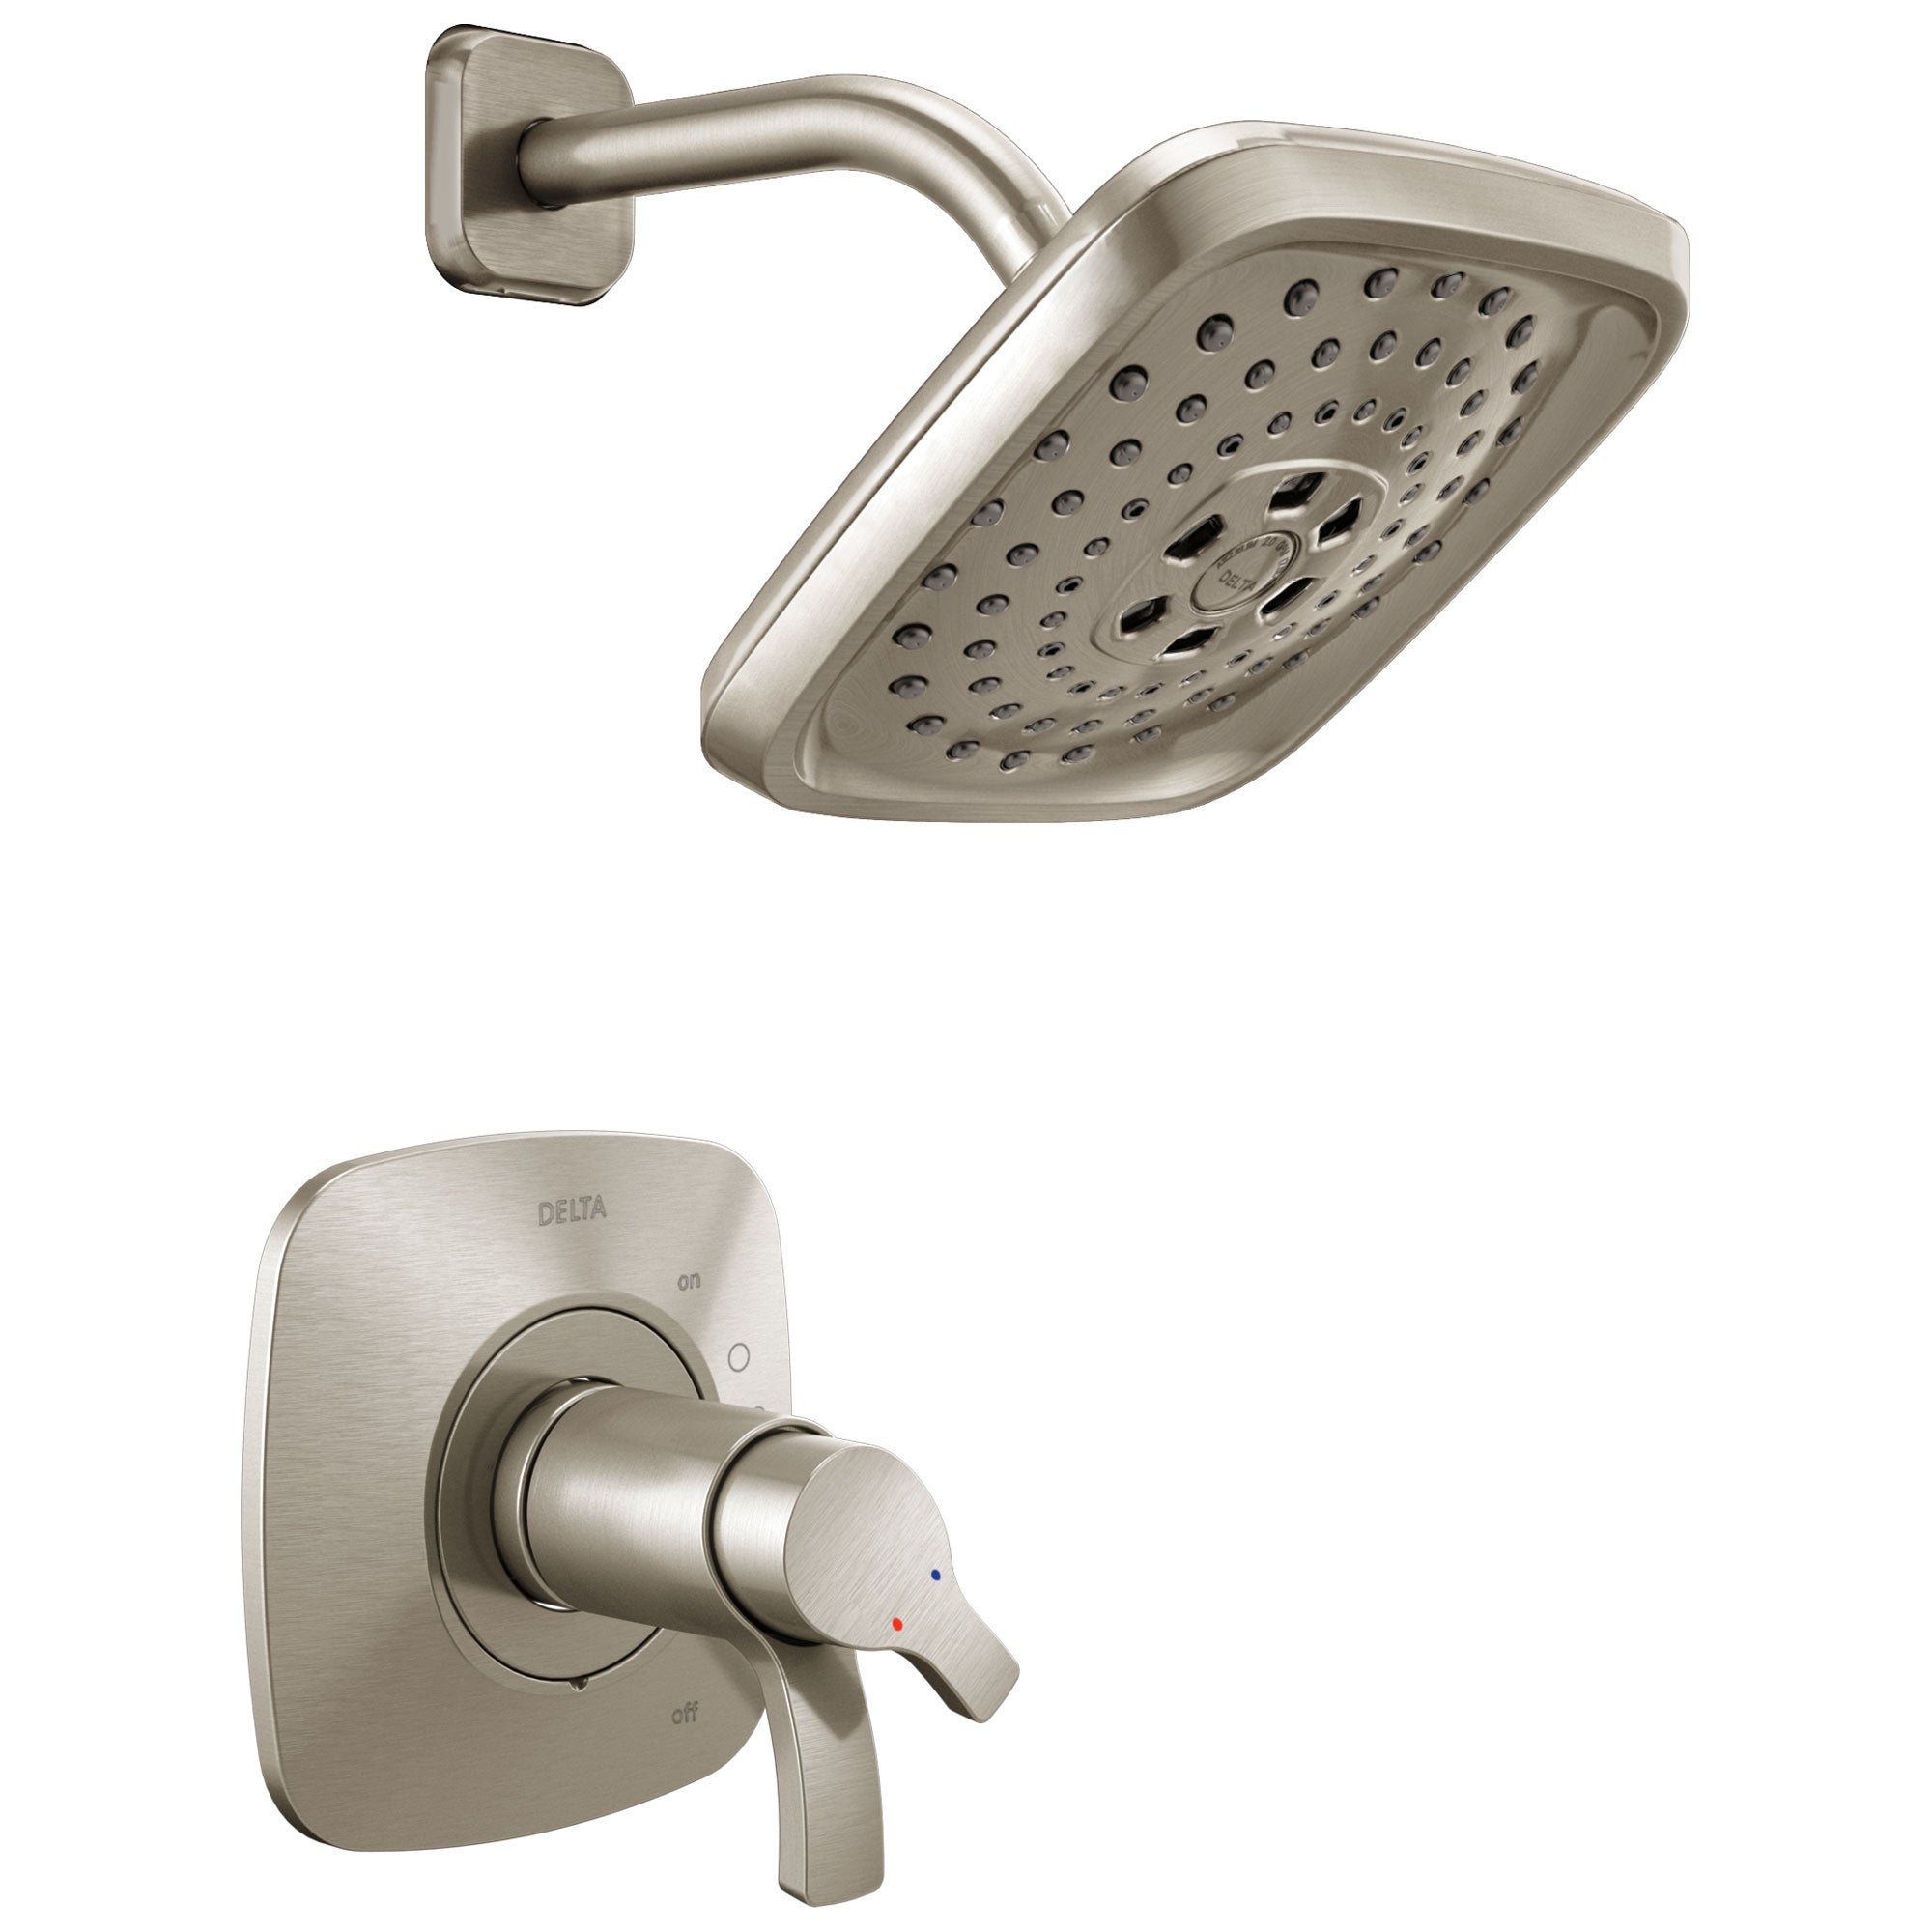 Delta Tesla H2Okinetic 1-Handle Shower Faucet in Stainless Steel Finish Includes Rough-in Valve without Stops D2590V